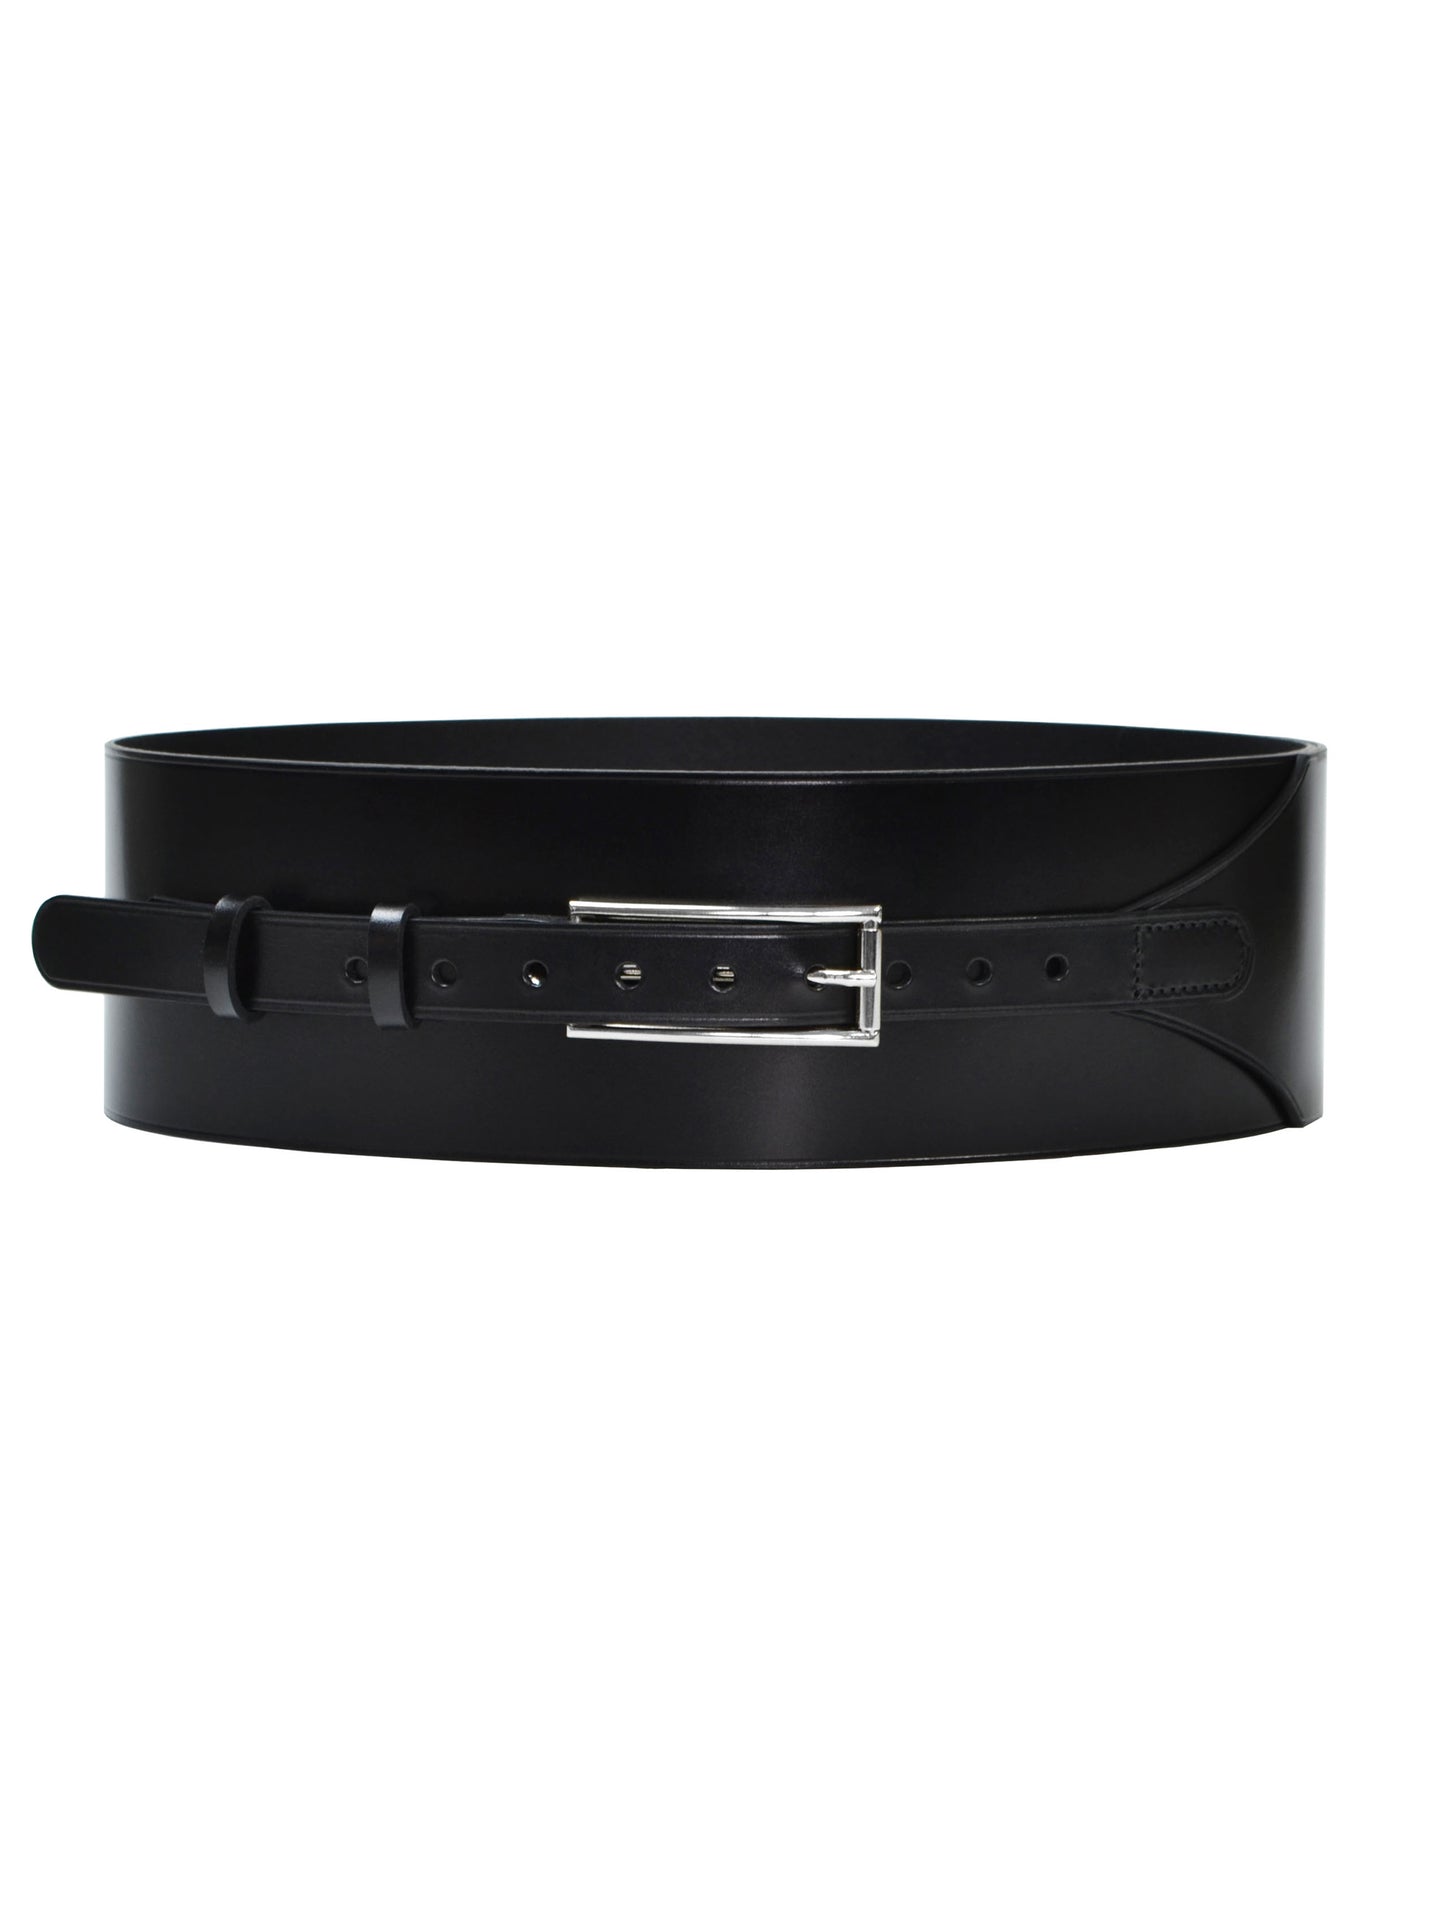 Front view of black leather wide belt.